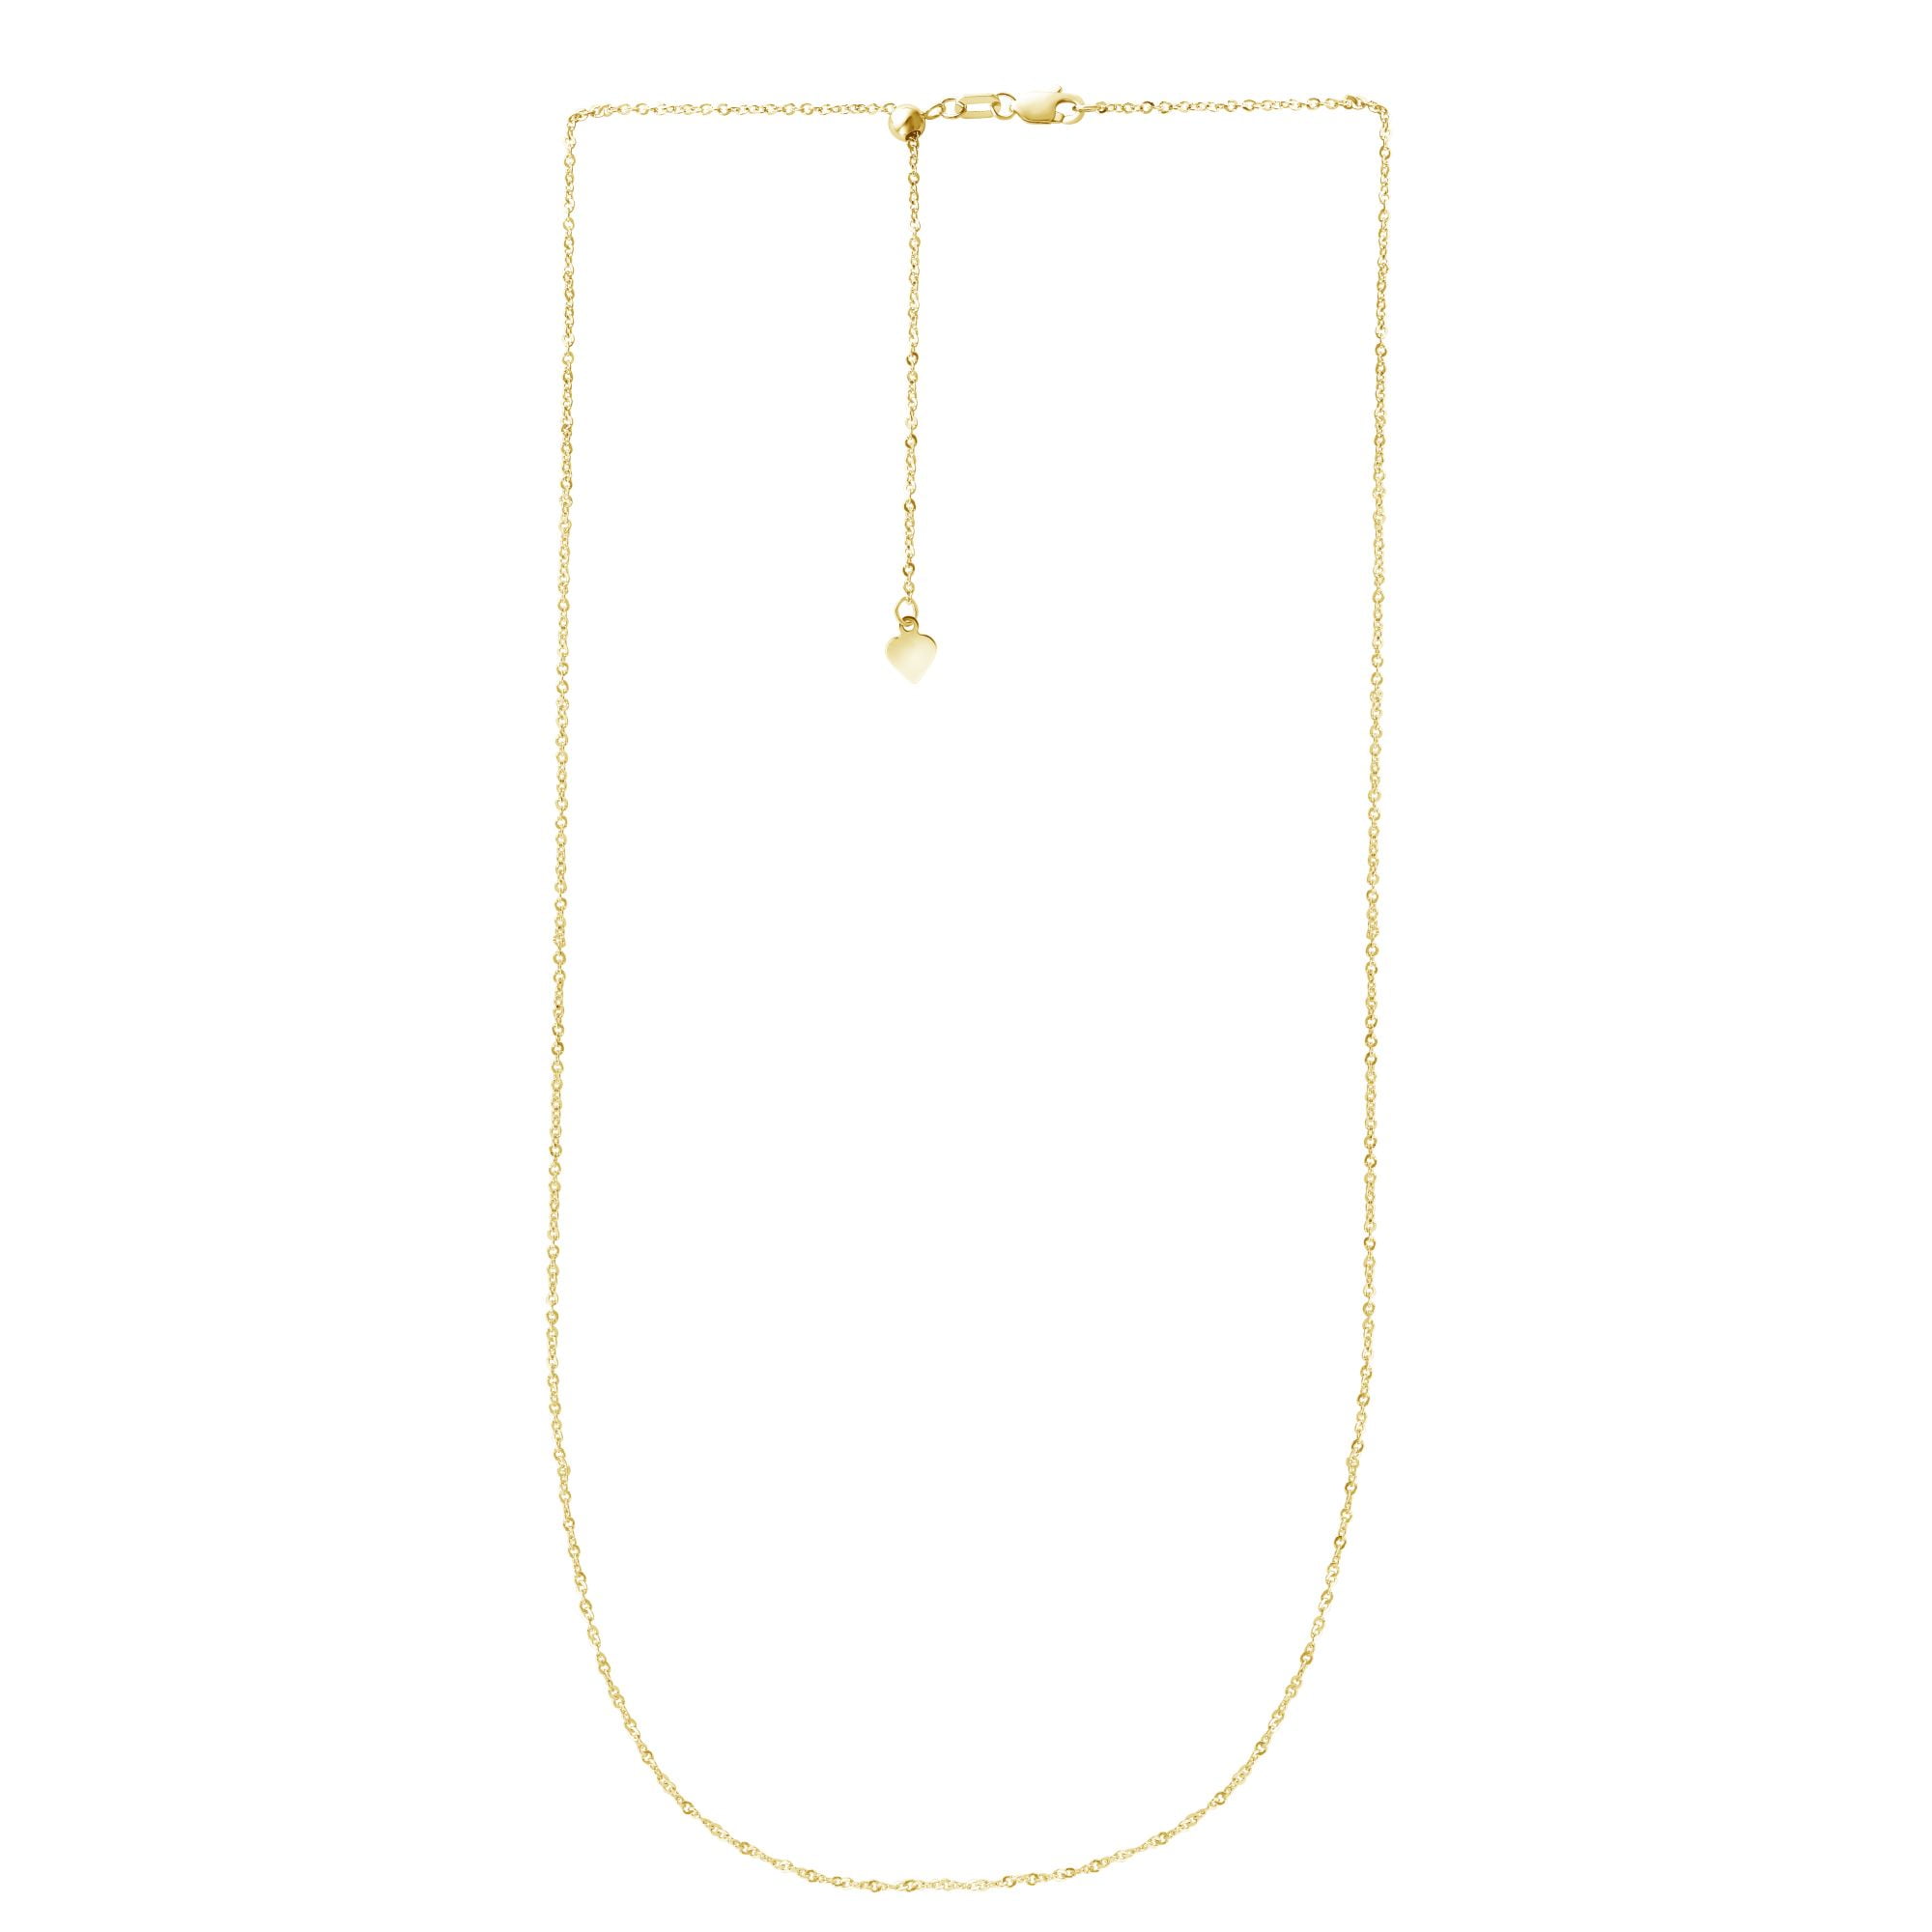 14K Yellow Gold Bat Pendant on an Adjustable 14K Yellow Gold Chain Necklace